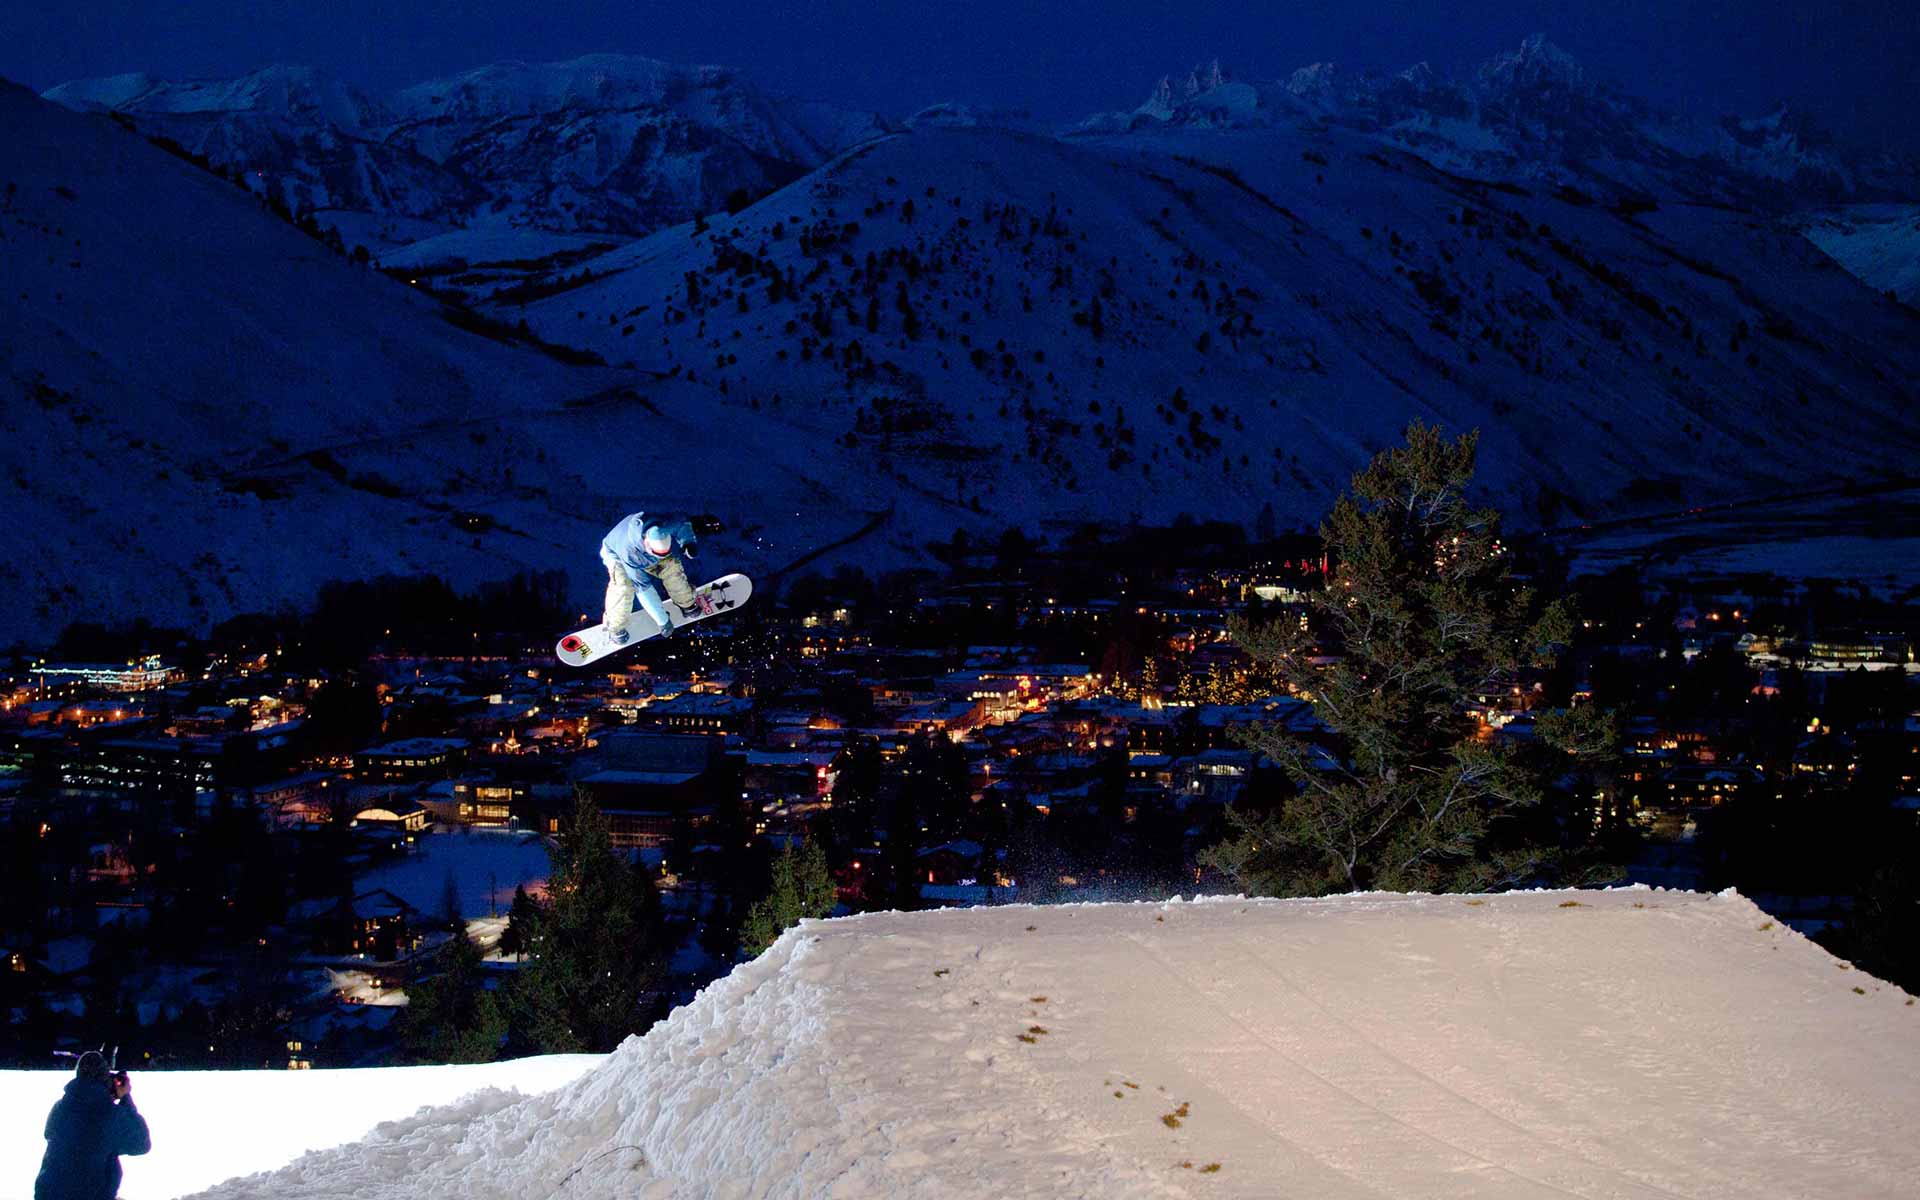 Snowboarder in air after jump at night at Snow King Mountain Jackson WY